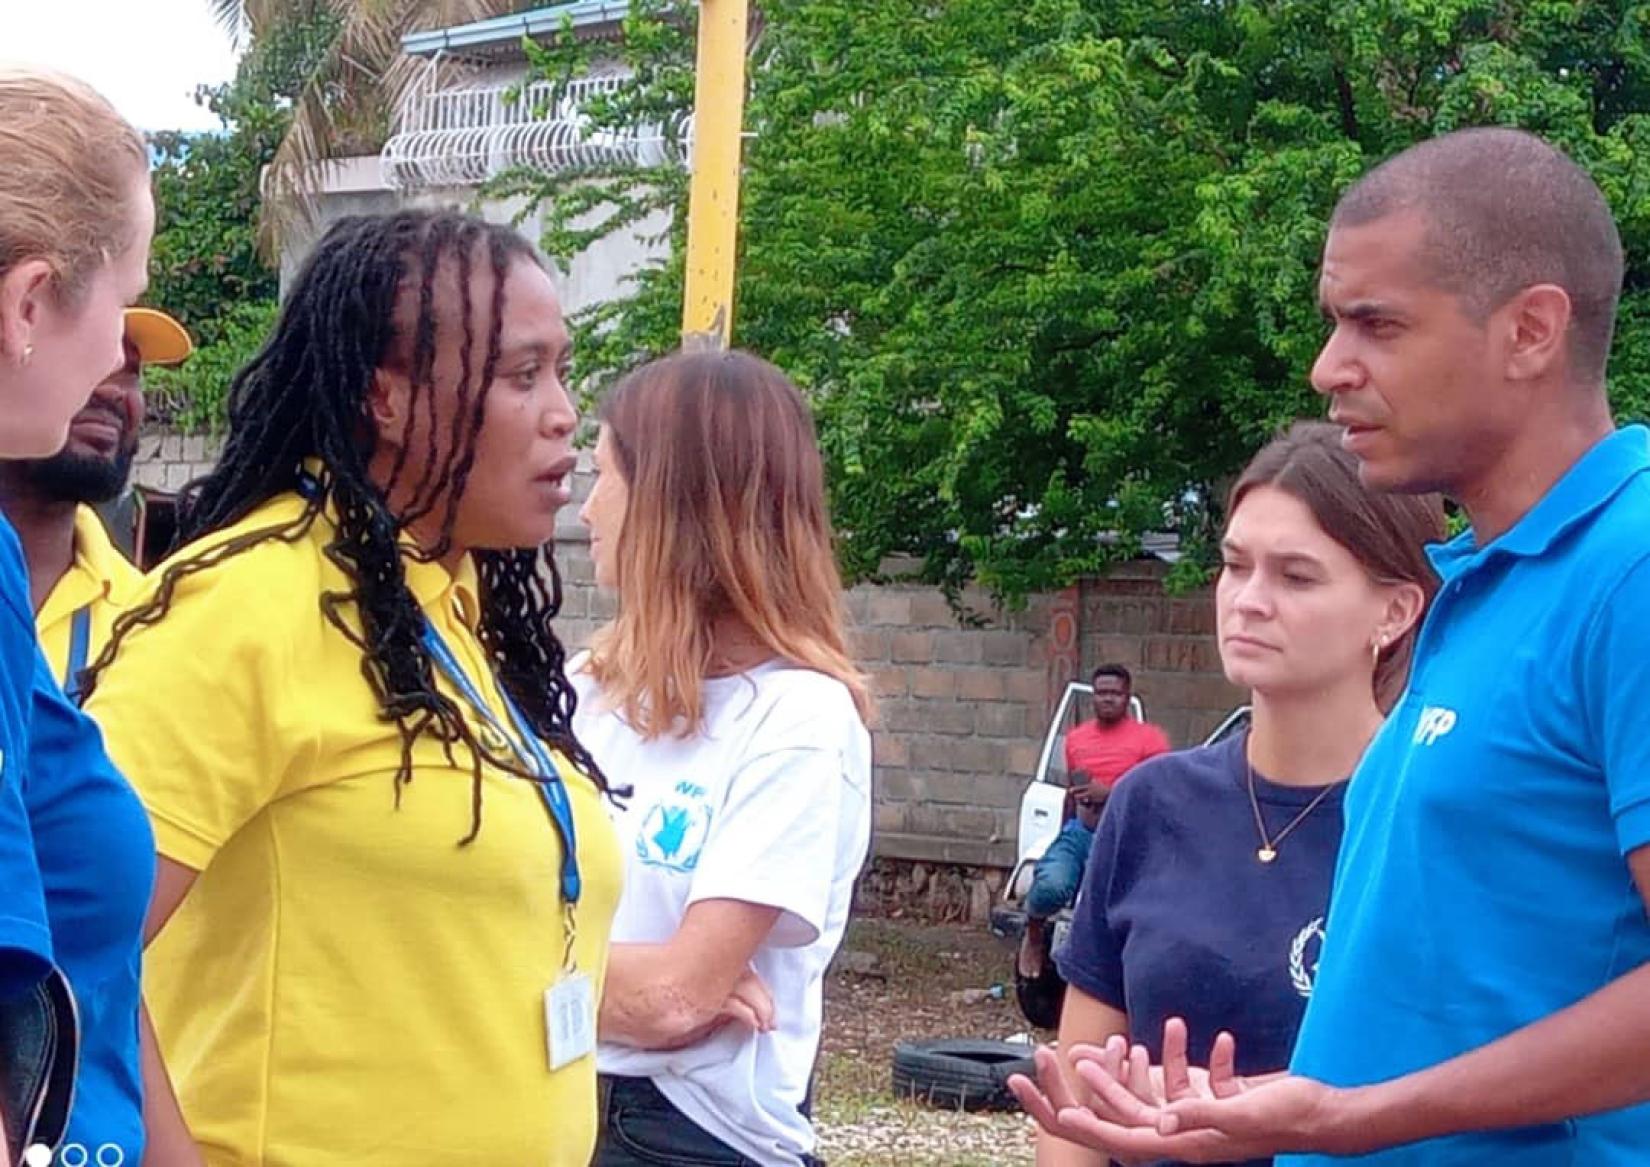 The CAPAC chief, Chantale Valcourt (second left), talks to WFP staff in Port-au-Prince.